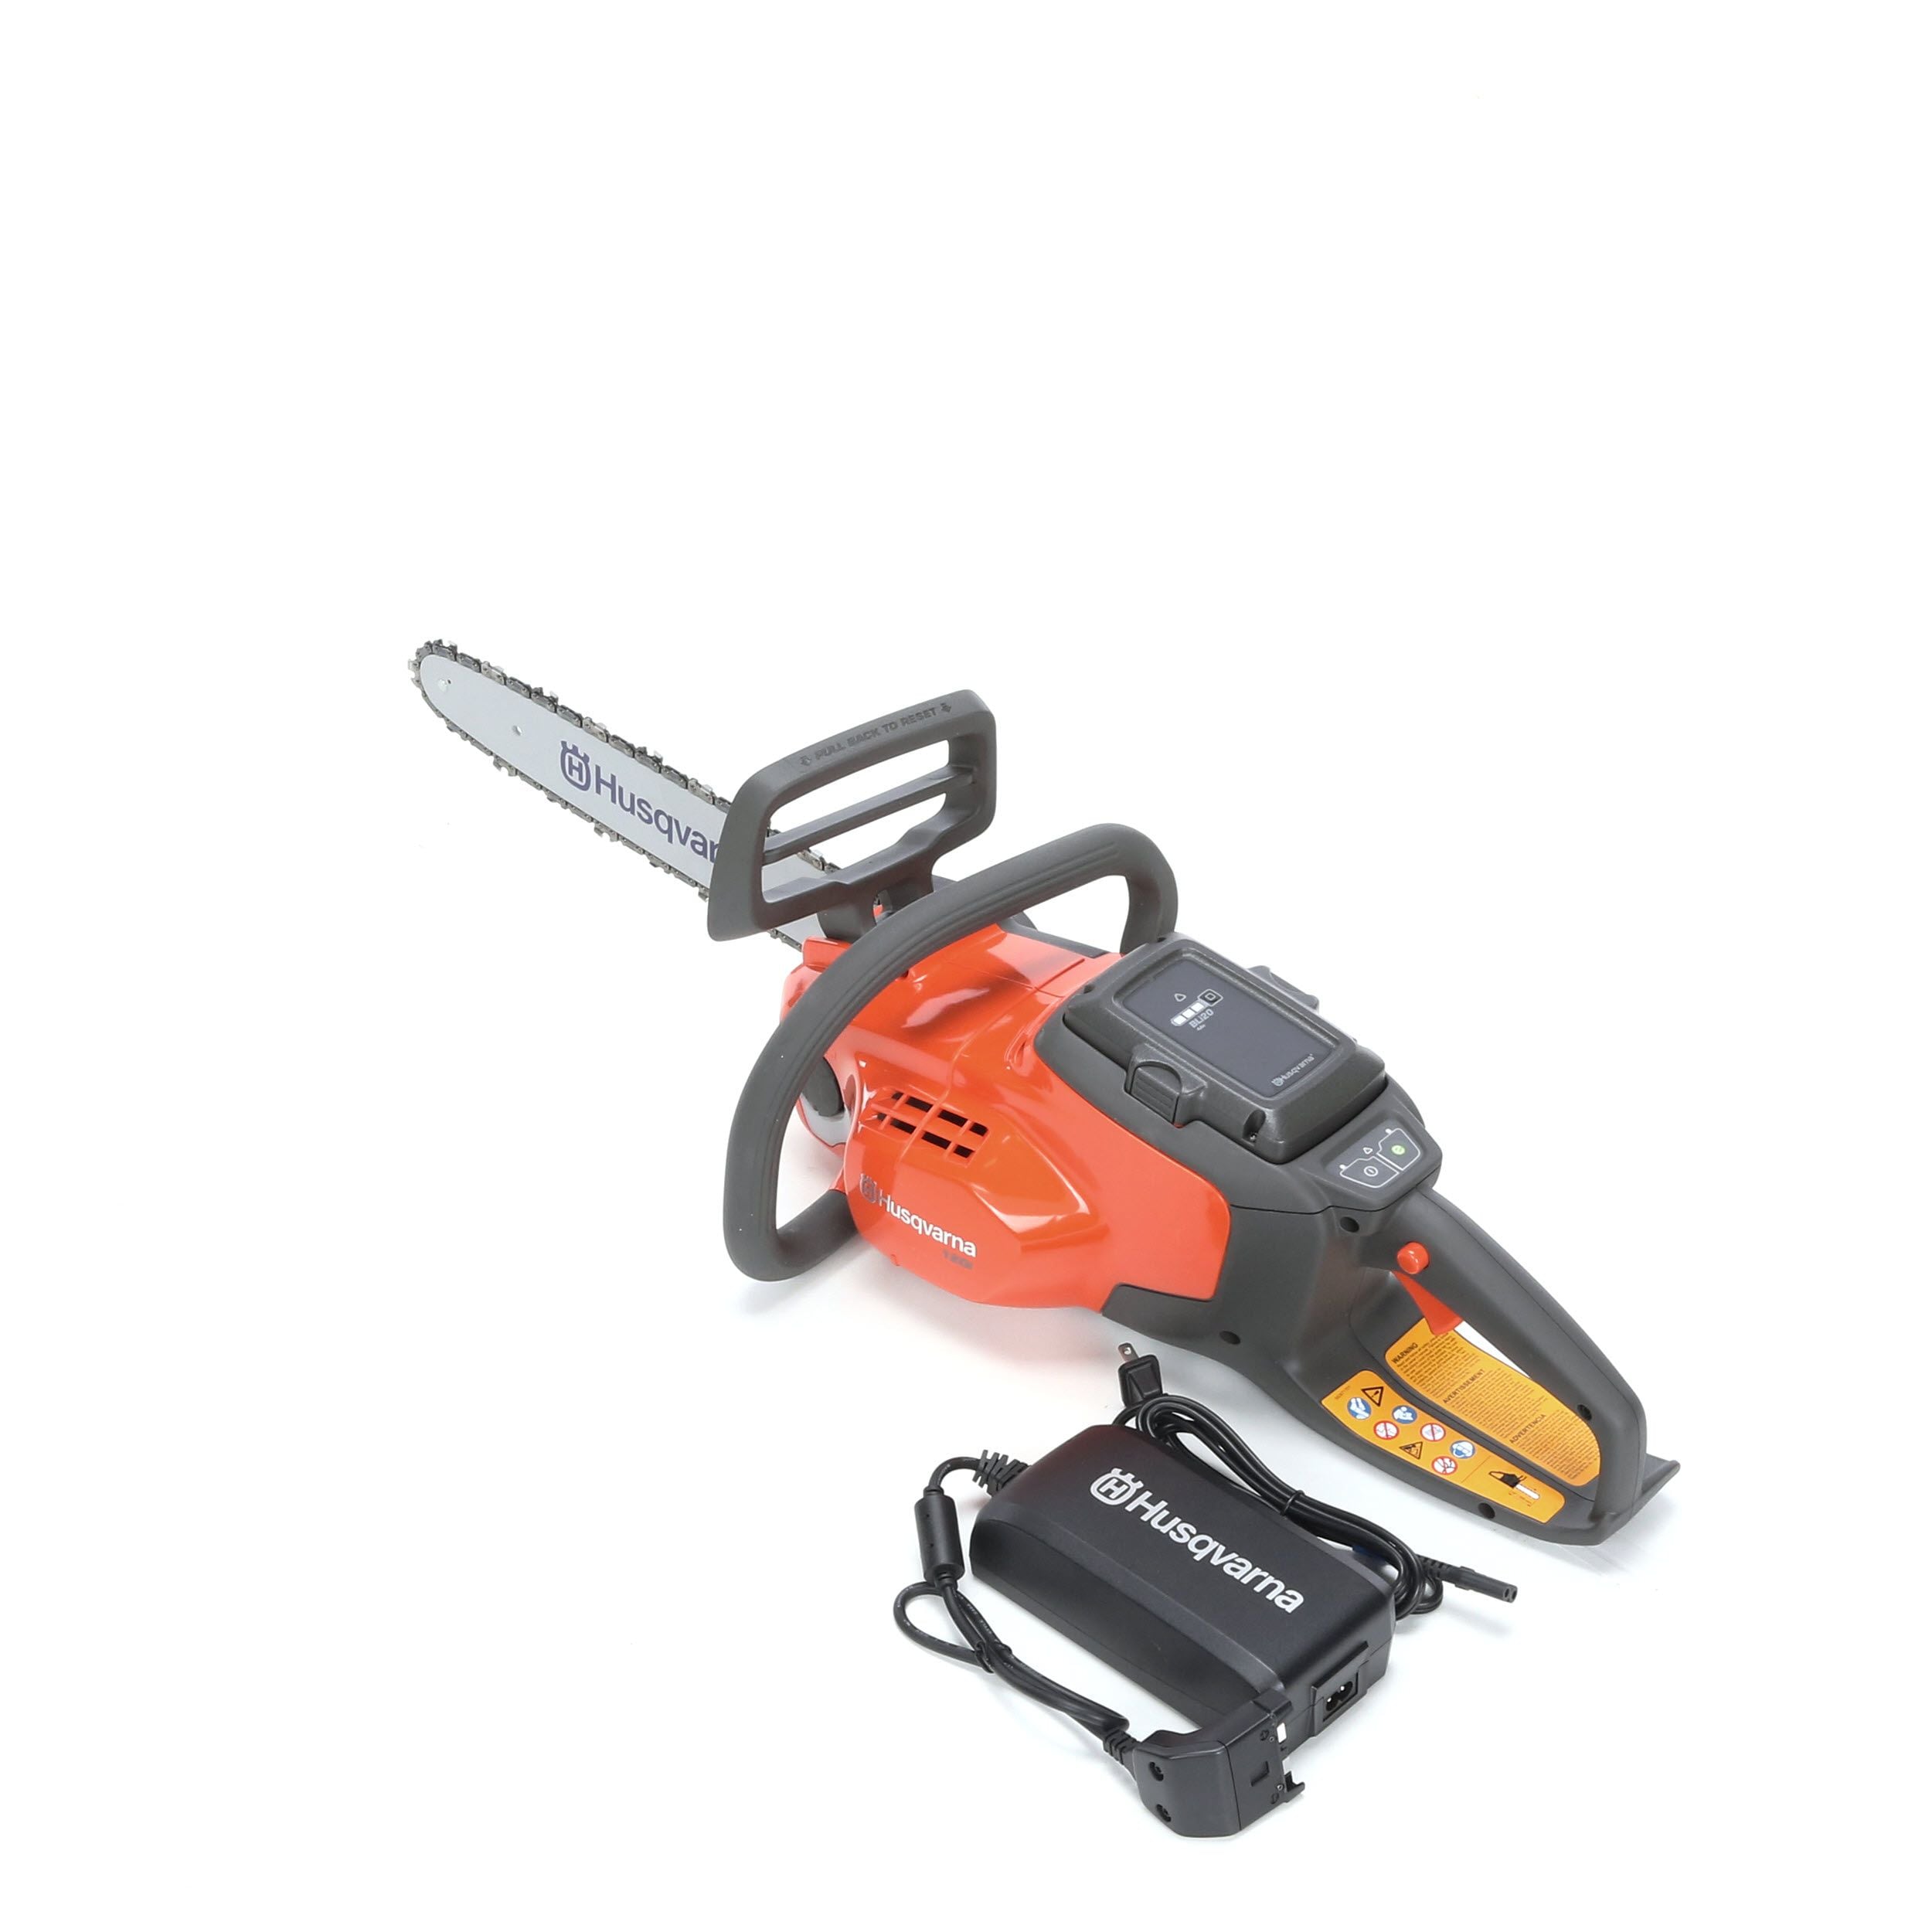 Husqvarna 120i Refurbished 14 in 40-Volt Cordless Chainsaw Battery Included 